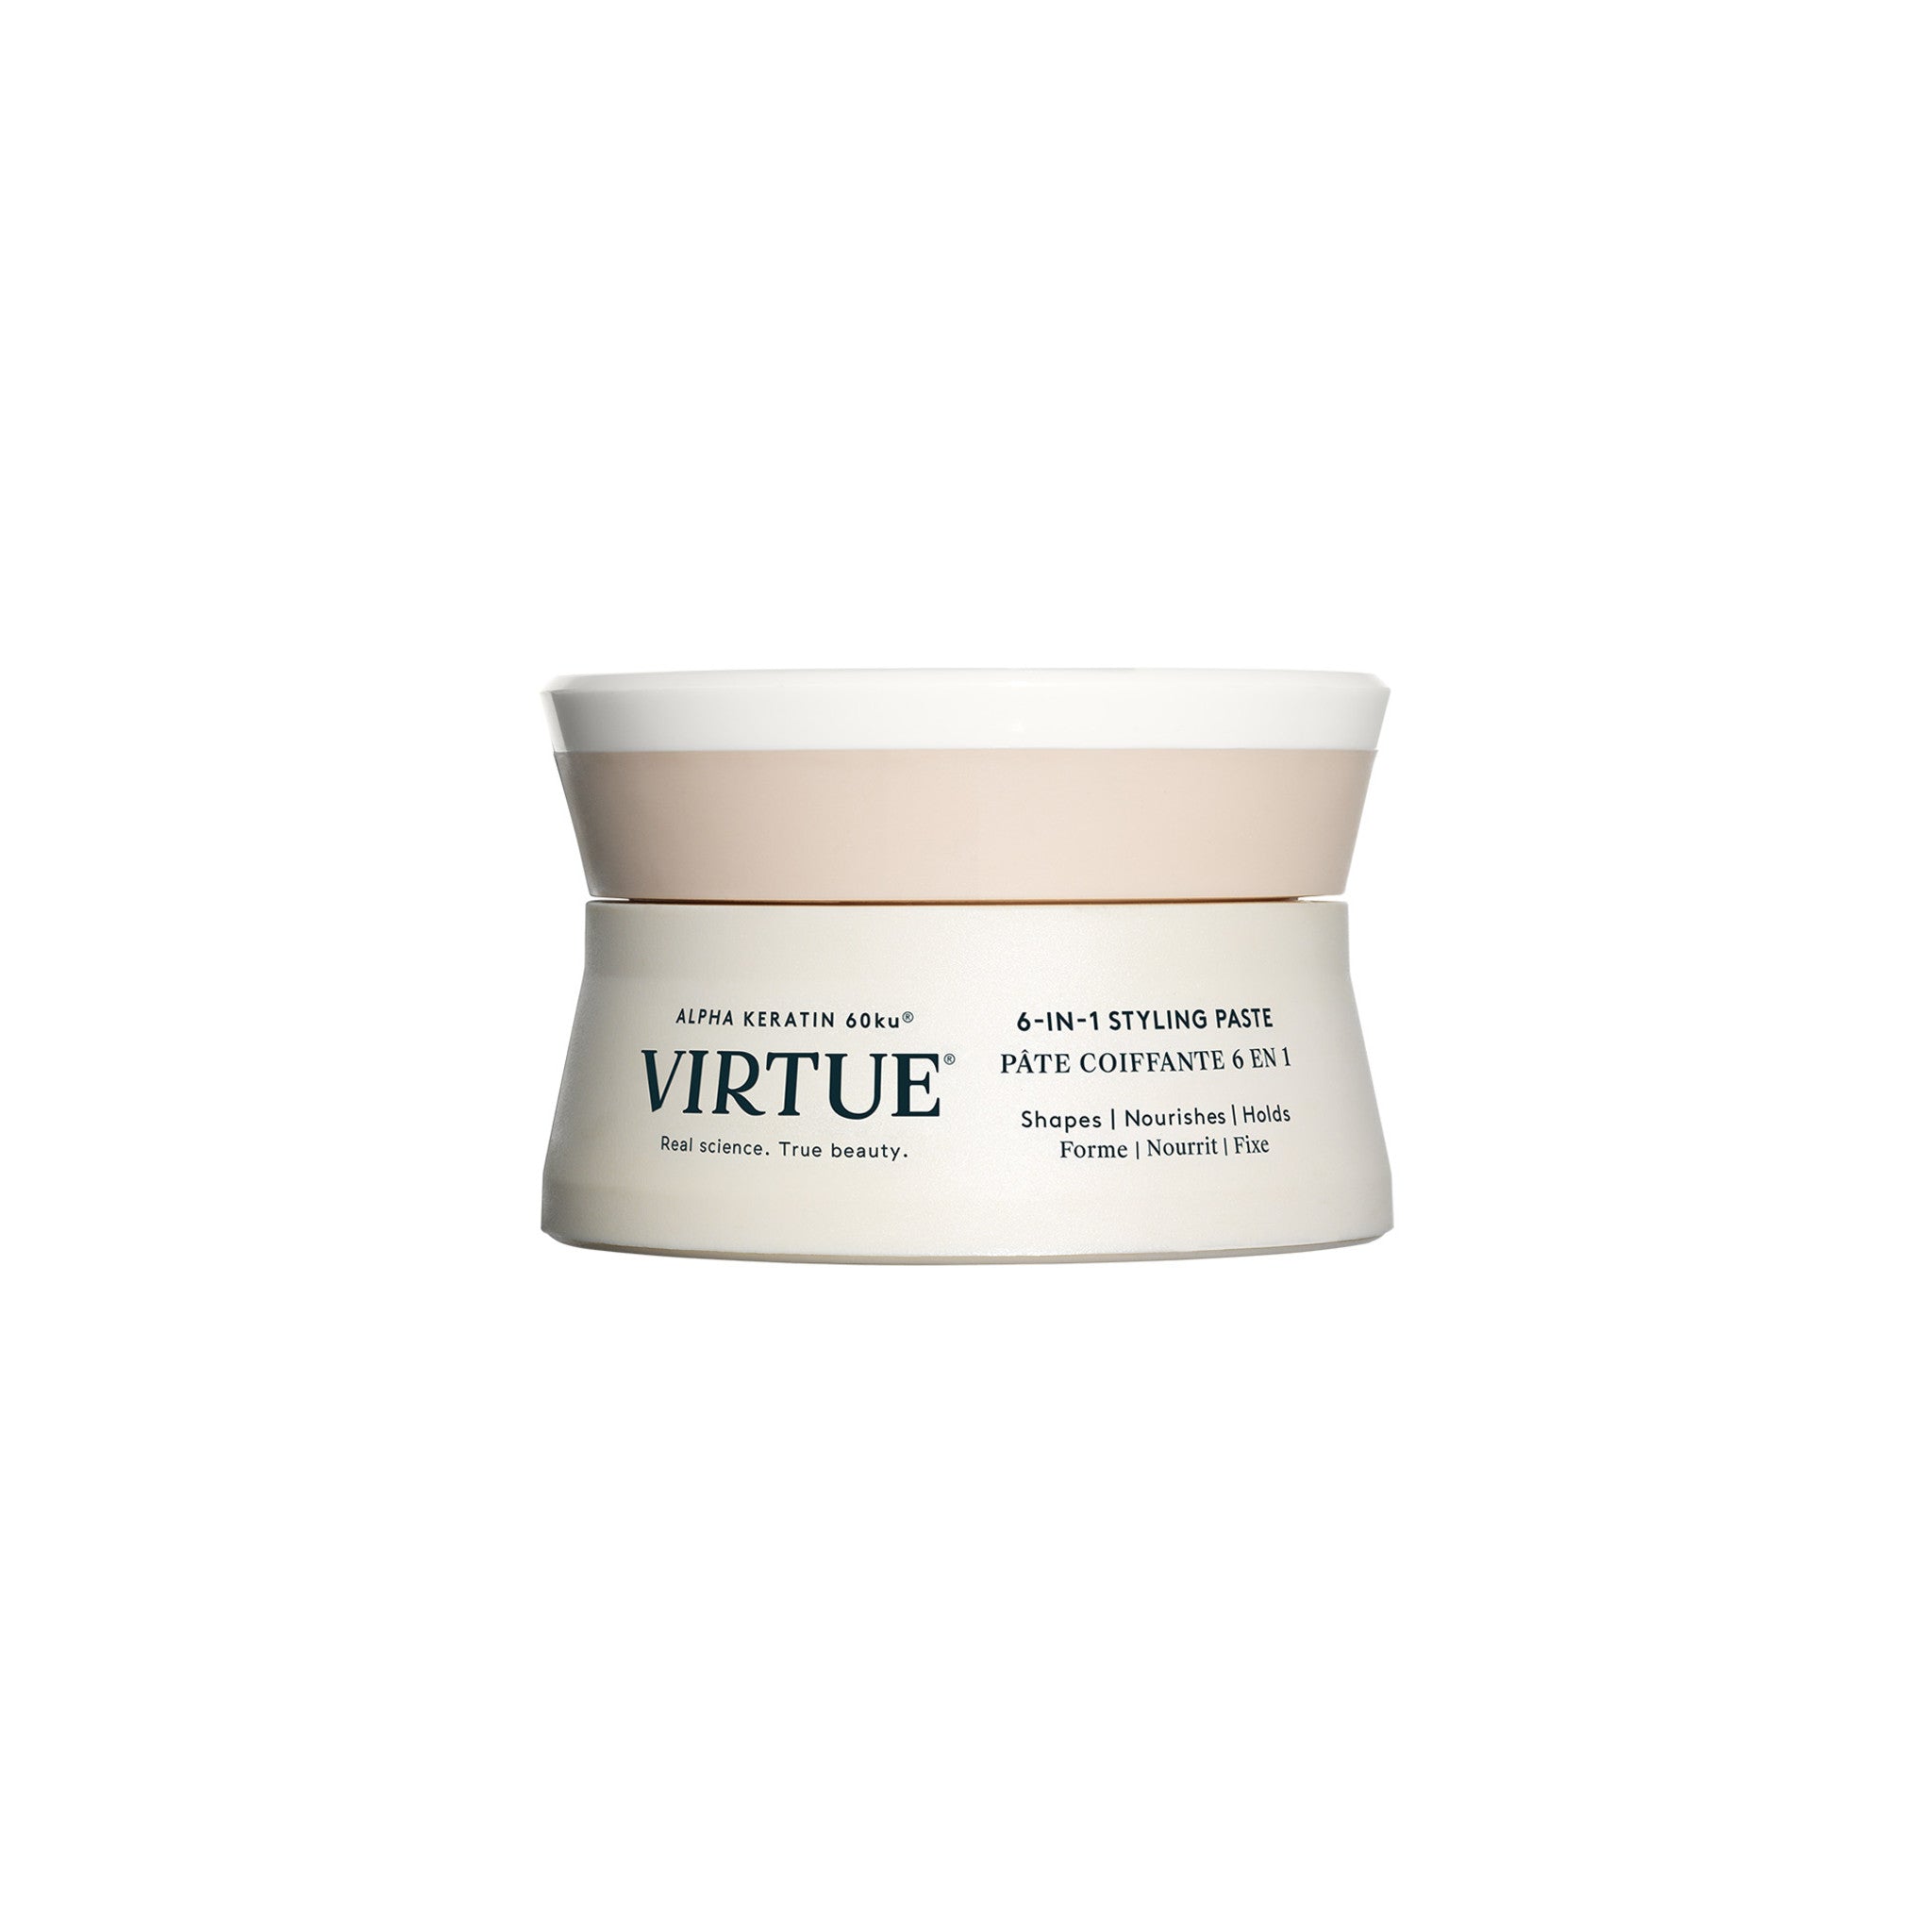 Virtue 6-In-1 Styling Paste main image.